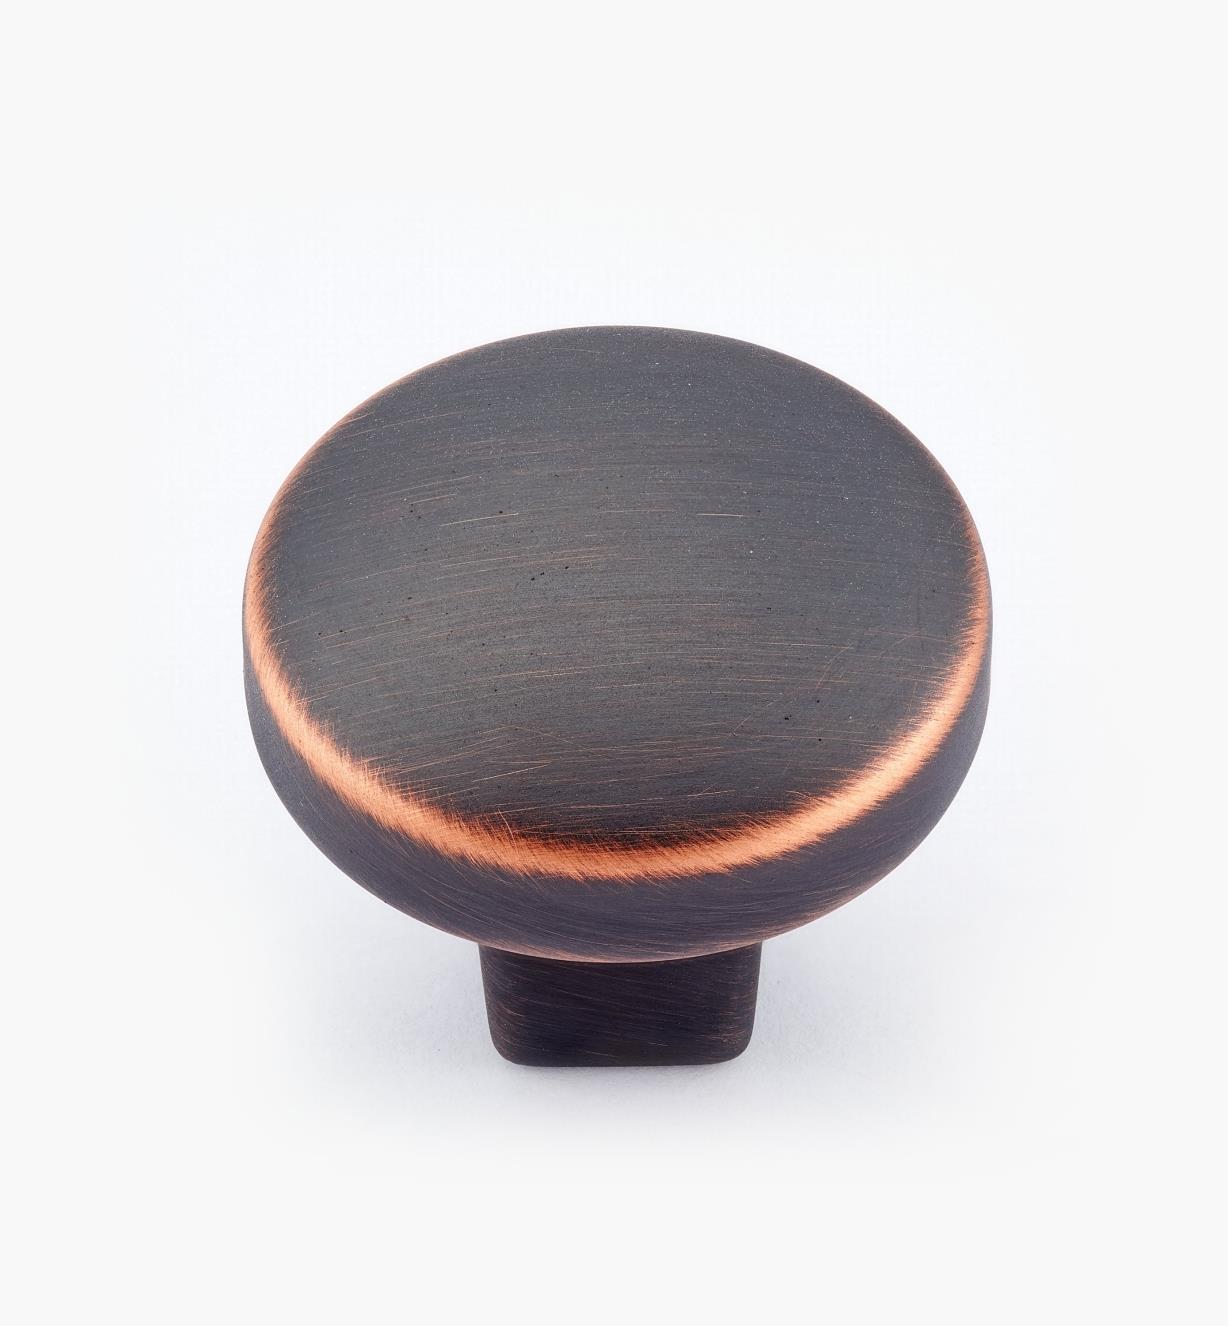 02A0984 - Forgings Oil-Rubbed Bronze Castings Knob